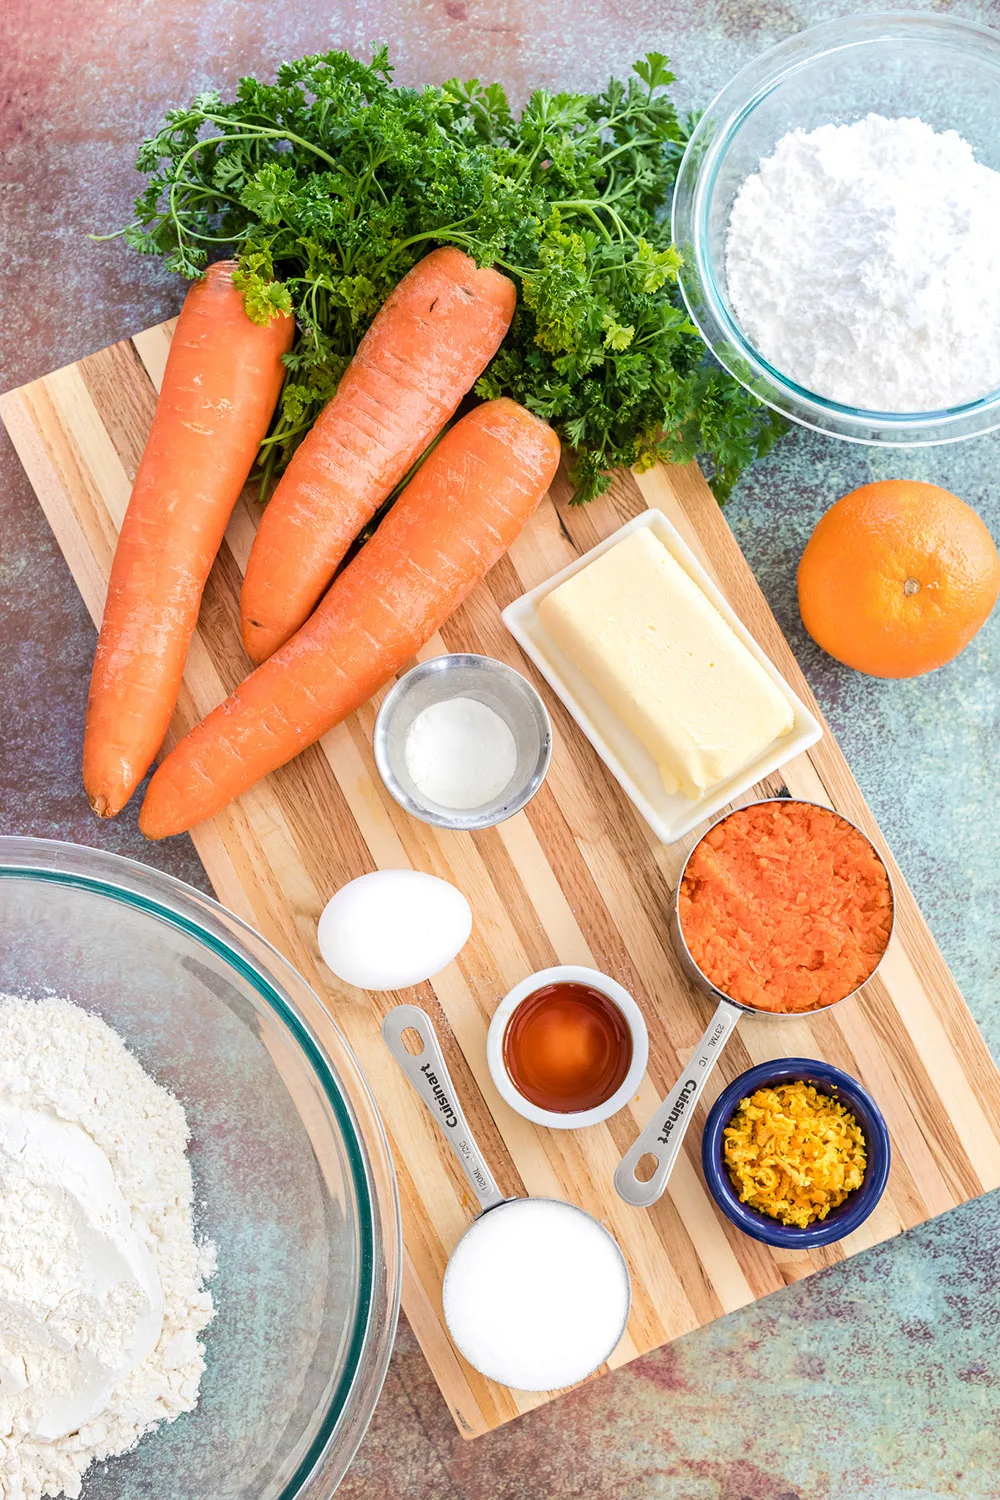 Carrots, sugar, flour, and other ingredients on a board.